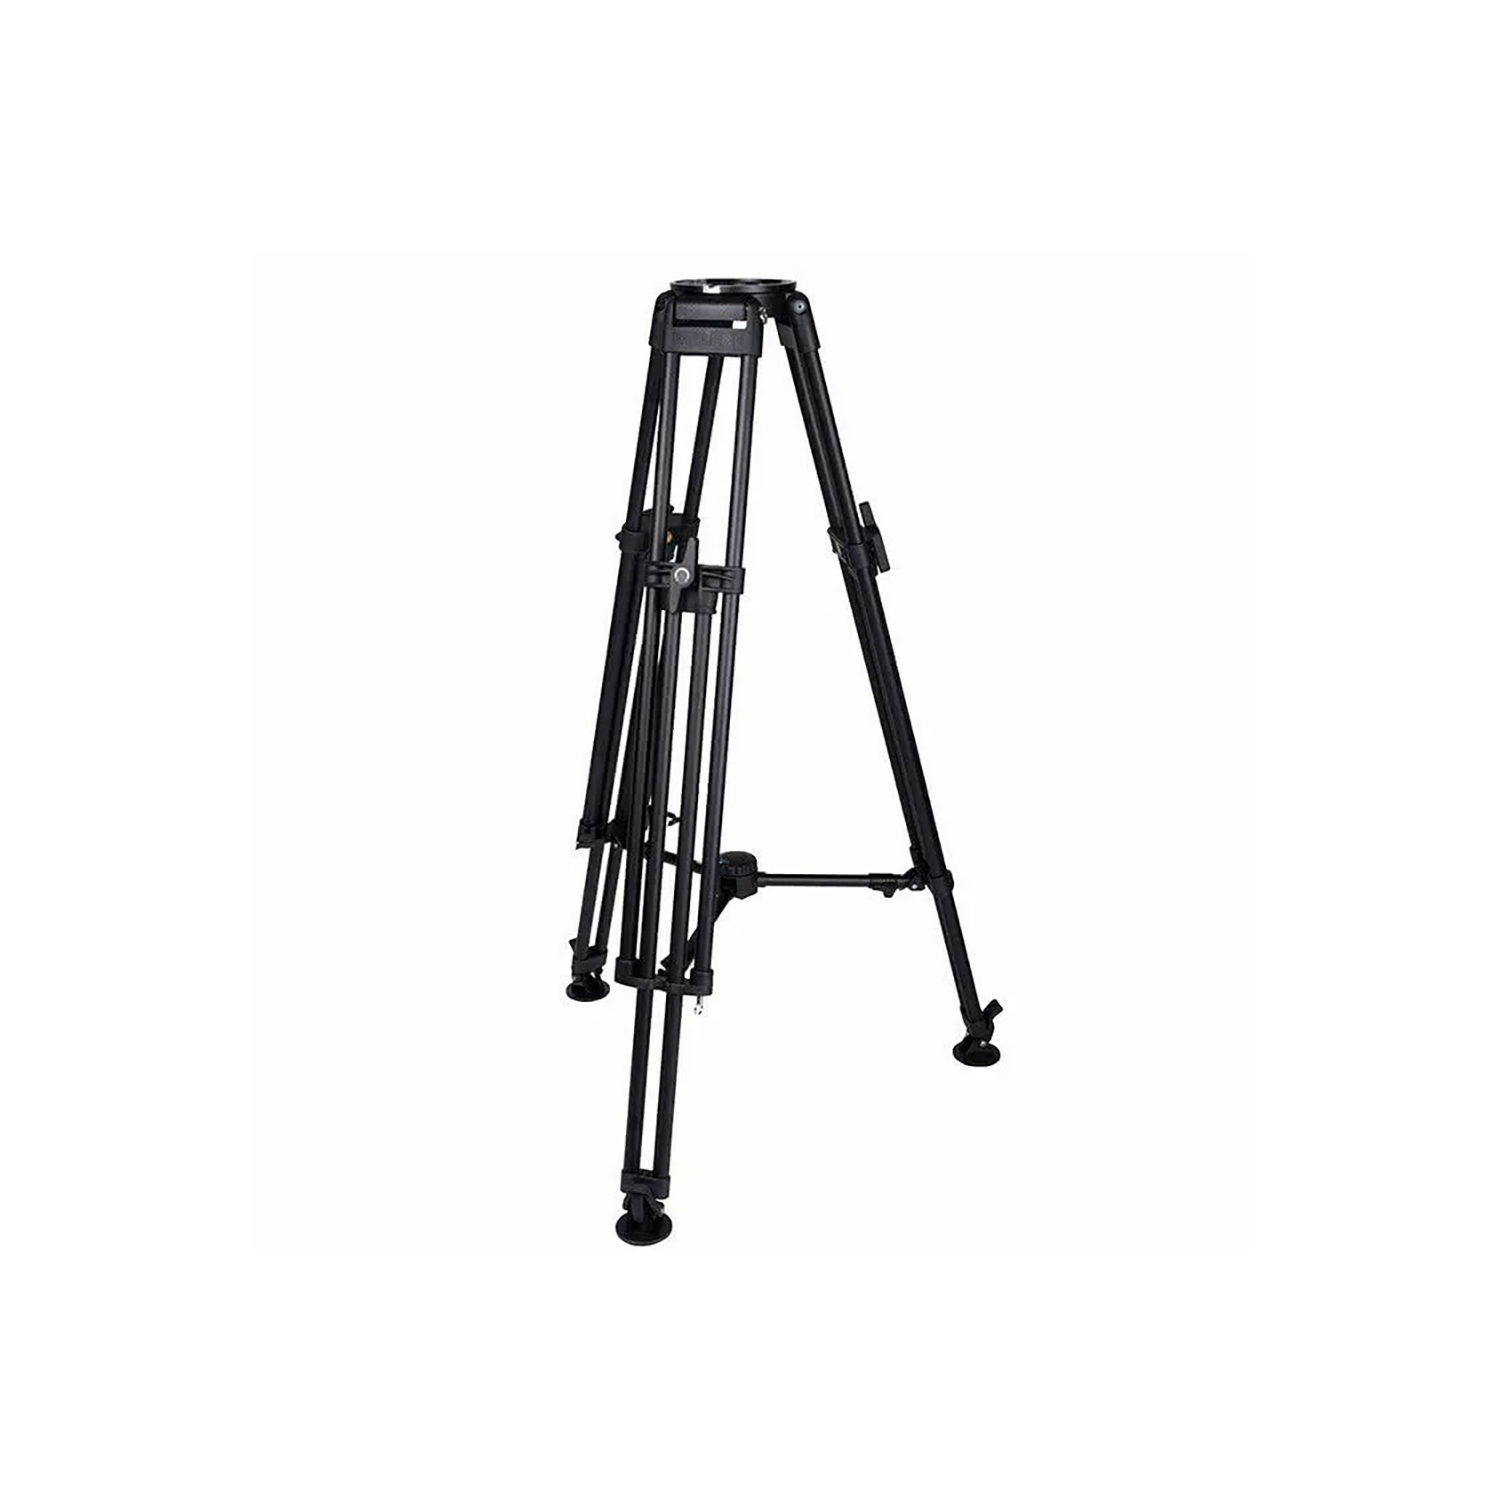 MILLER HDC MB 1-St Tall Alloy to suit Mid-Level Spreader (993) AND HD Feet (478)